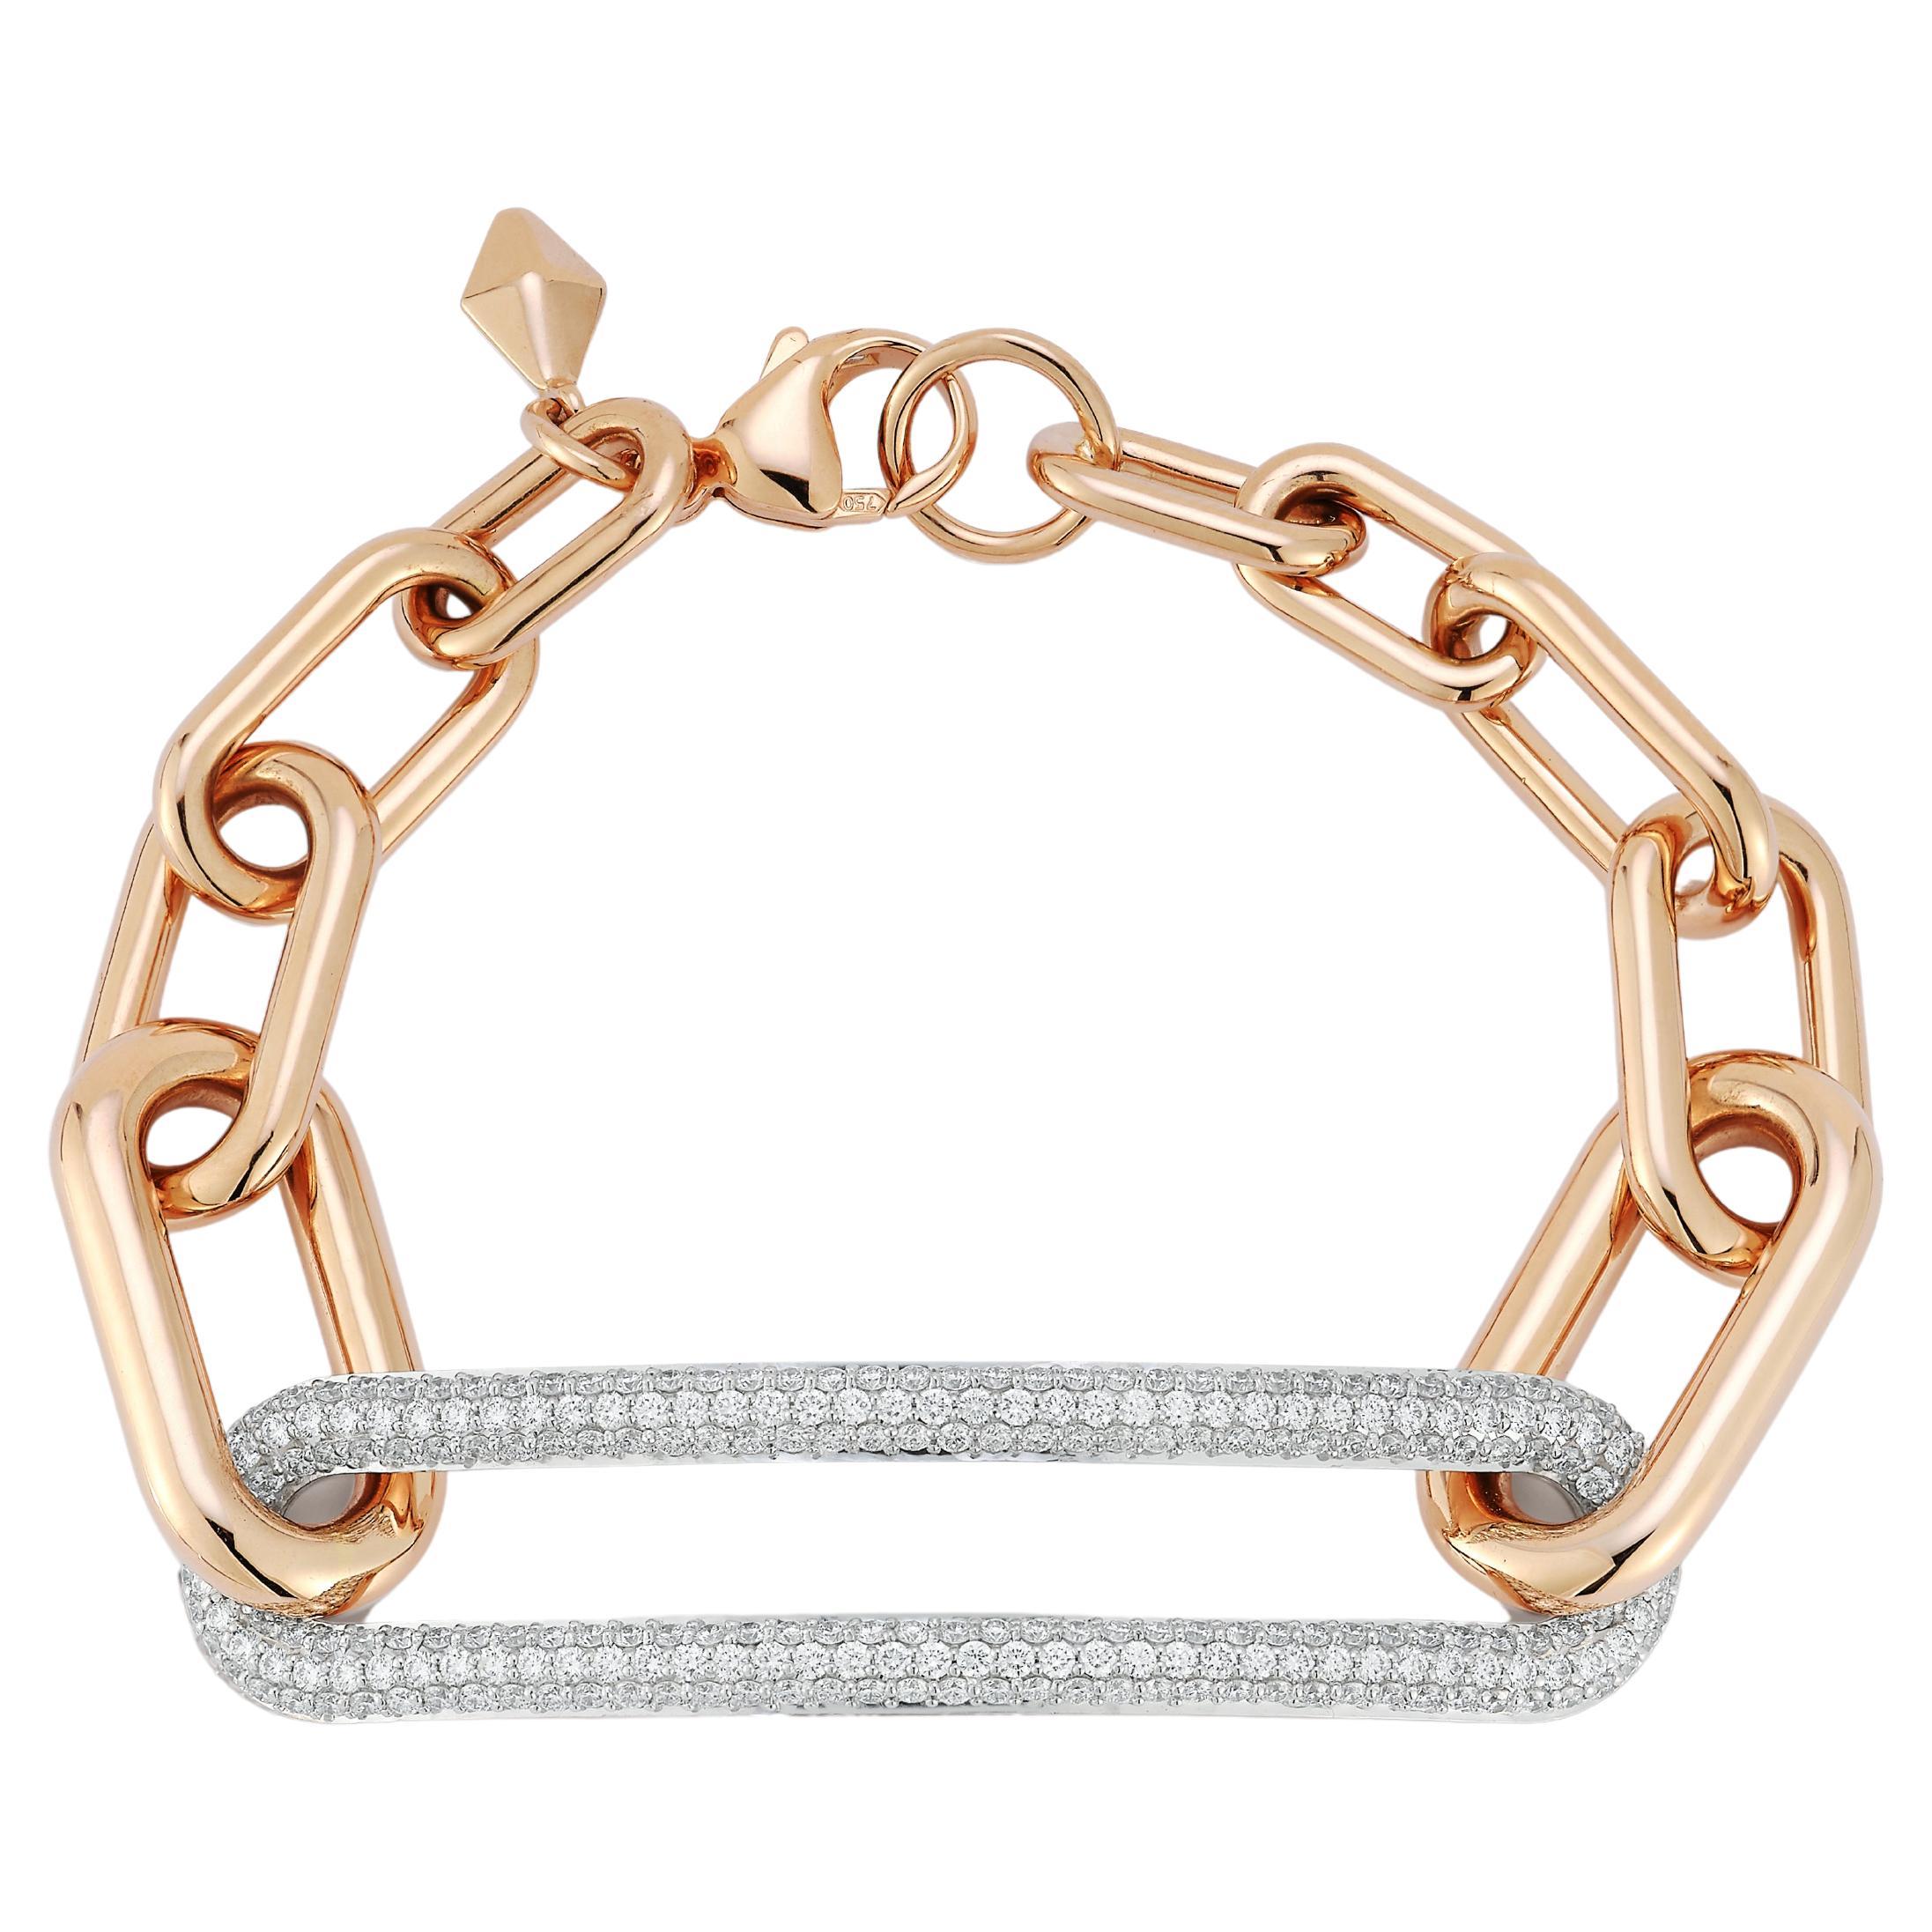 Walters Faith 18K Gold Graduating Chain Bracelet with Elongated Diamond Link For Sale